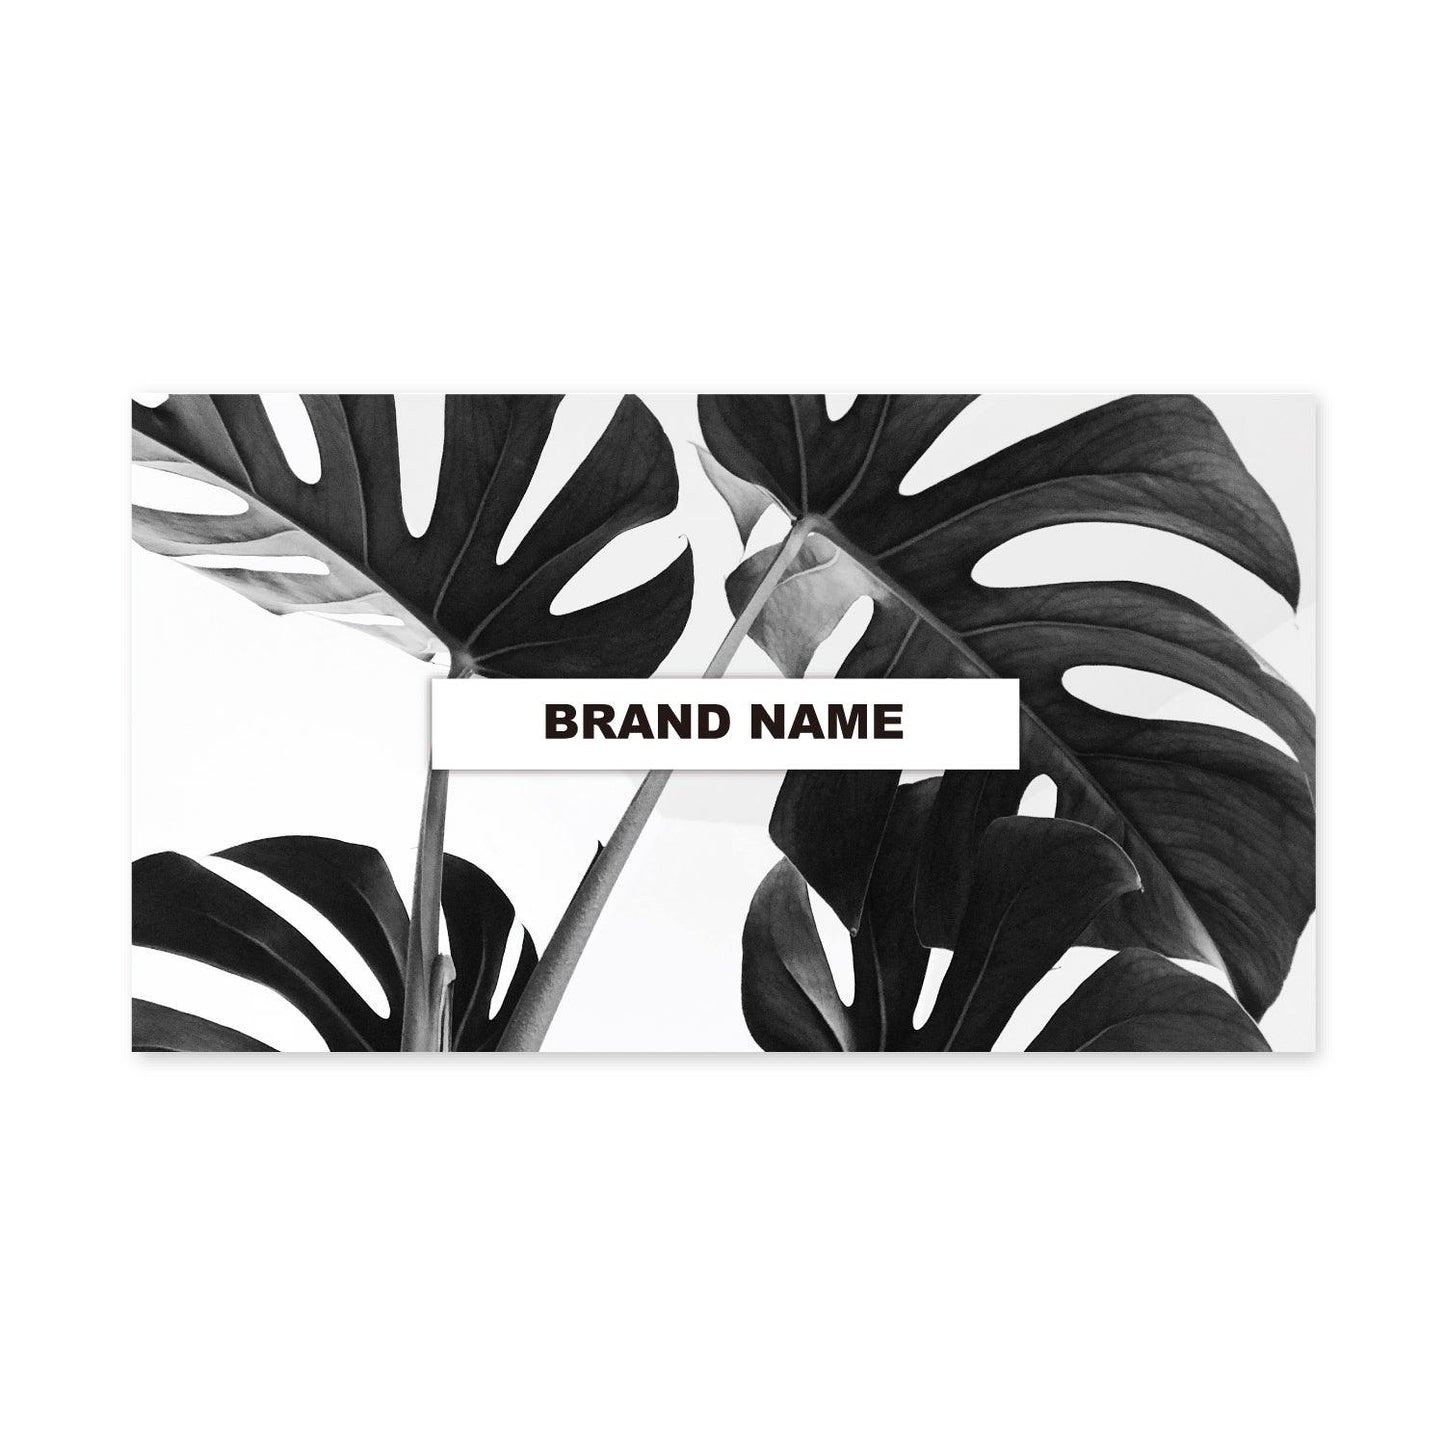 Premium Paper Business Cards with template designs - RedPrinting.com